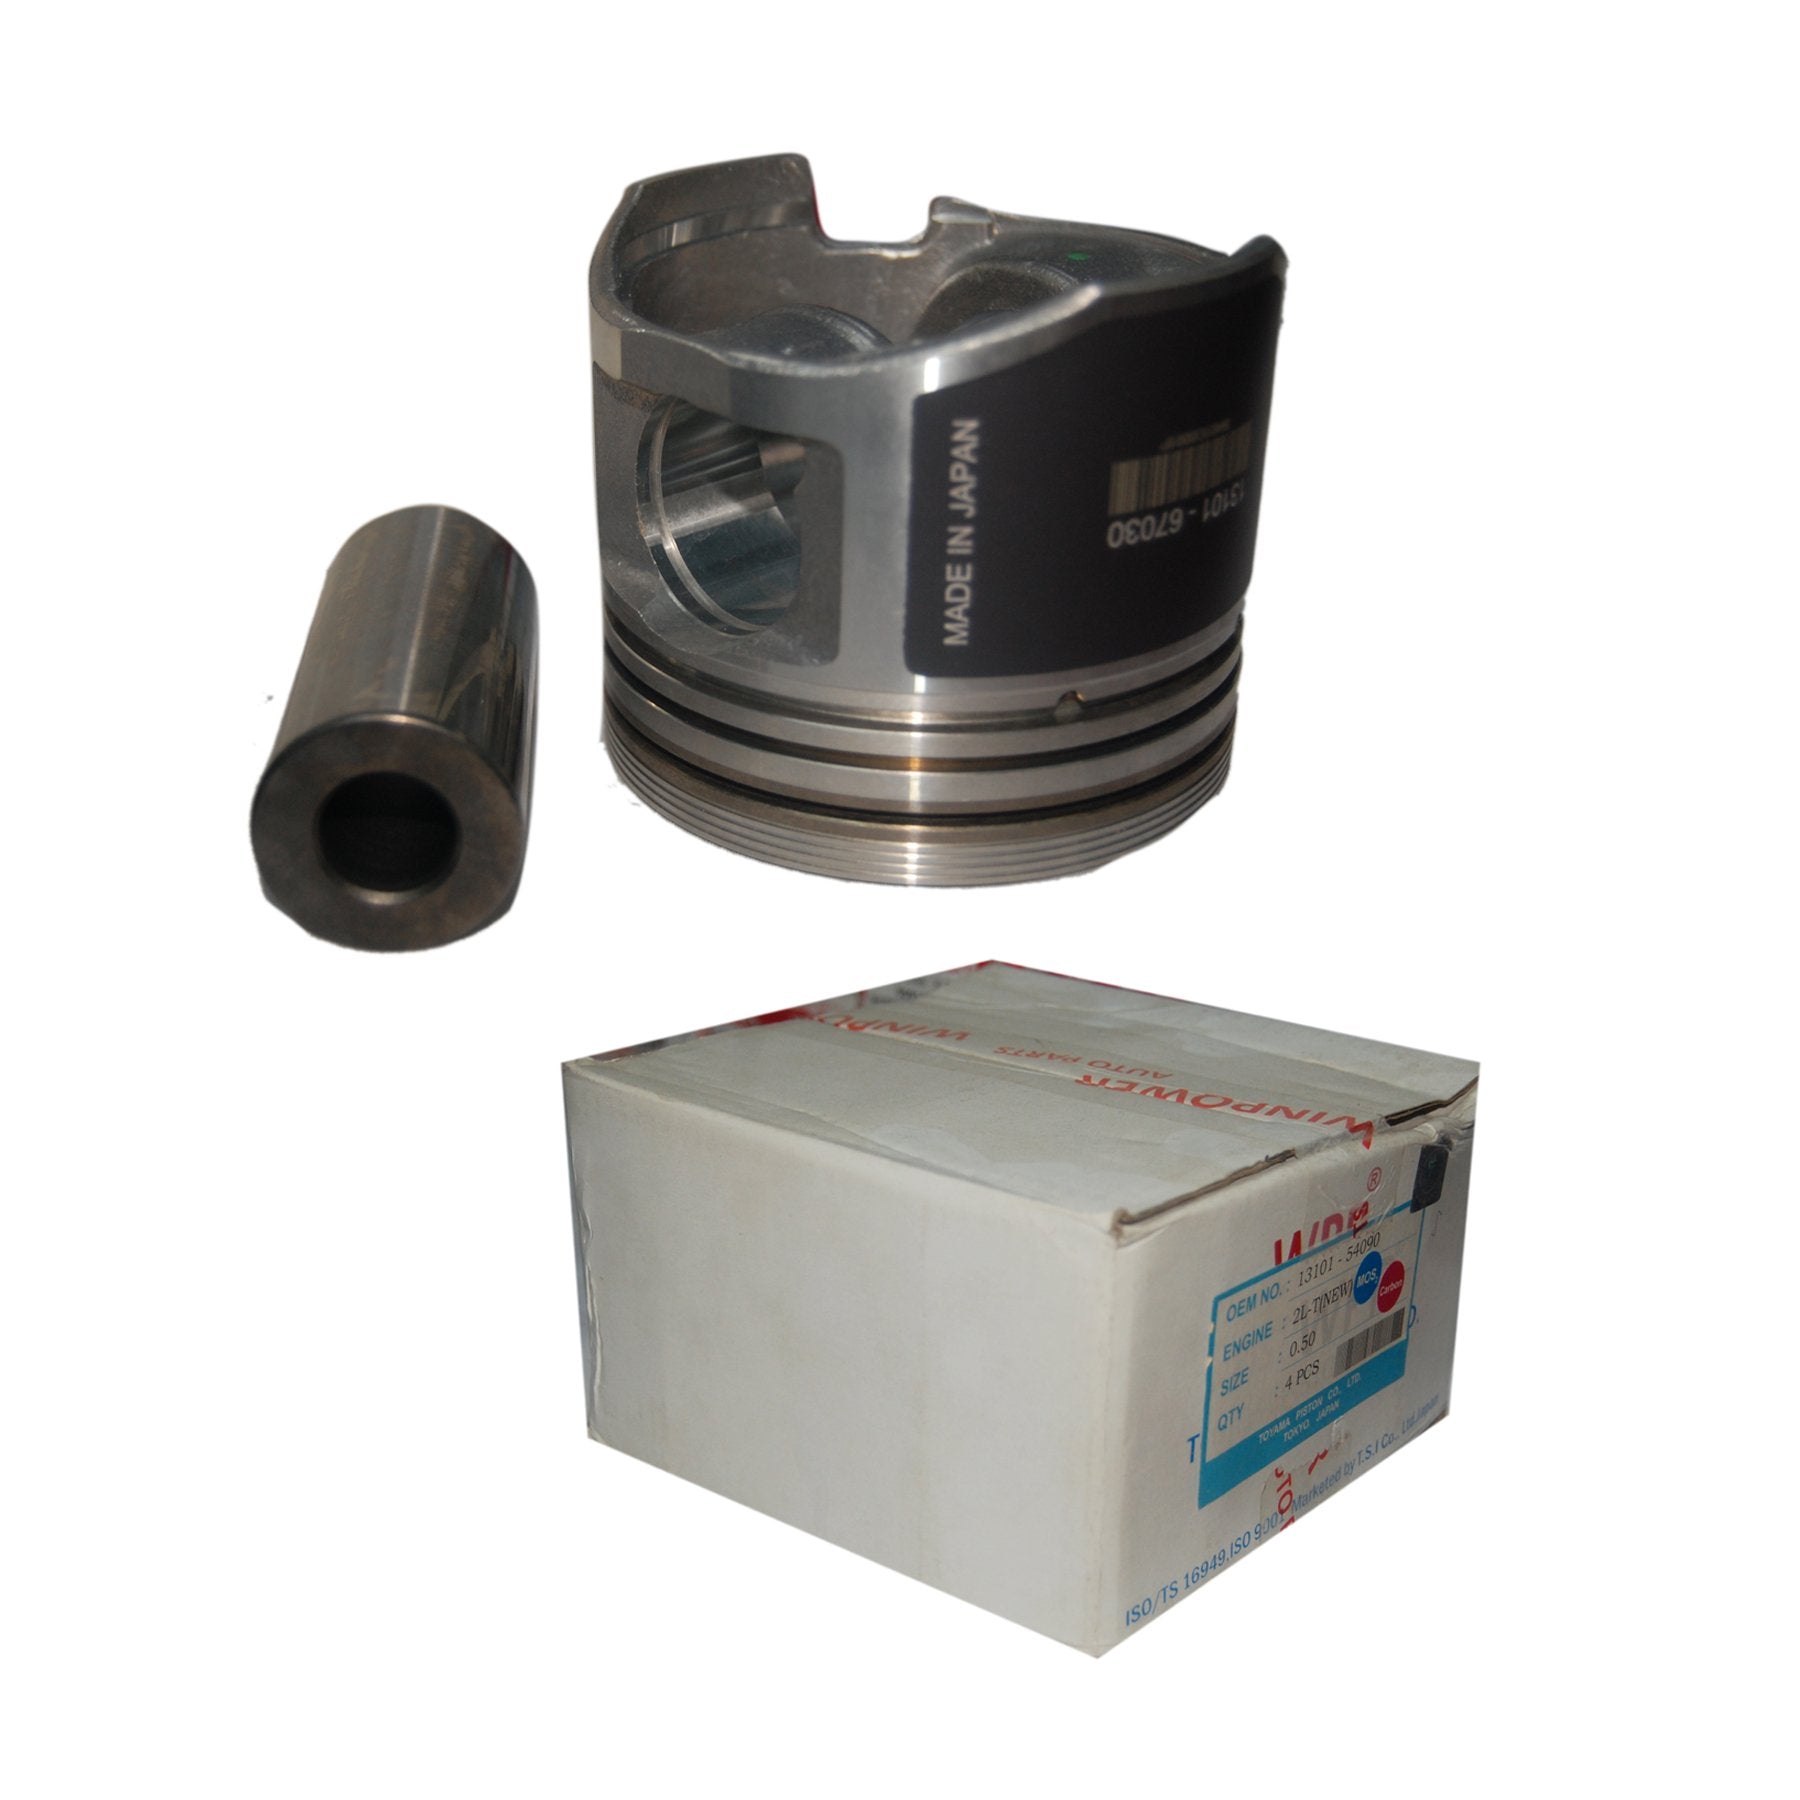 Piston W/Pin ,Ring Sets, R, 2C, 1.00, 13101-64141, 23183 (001442) - Win Store